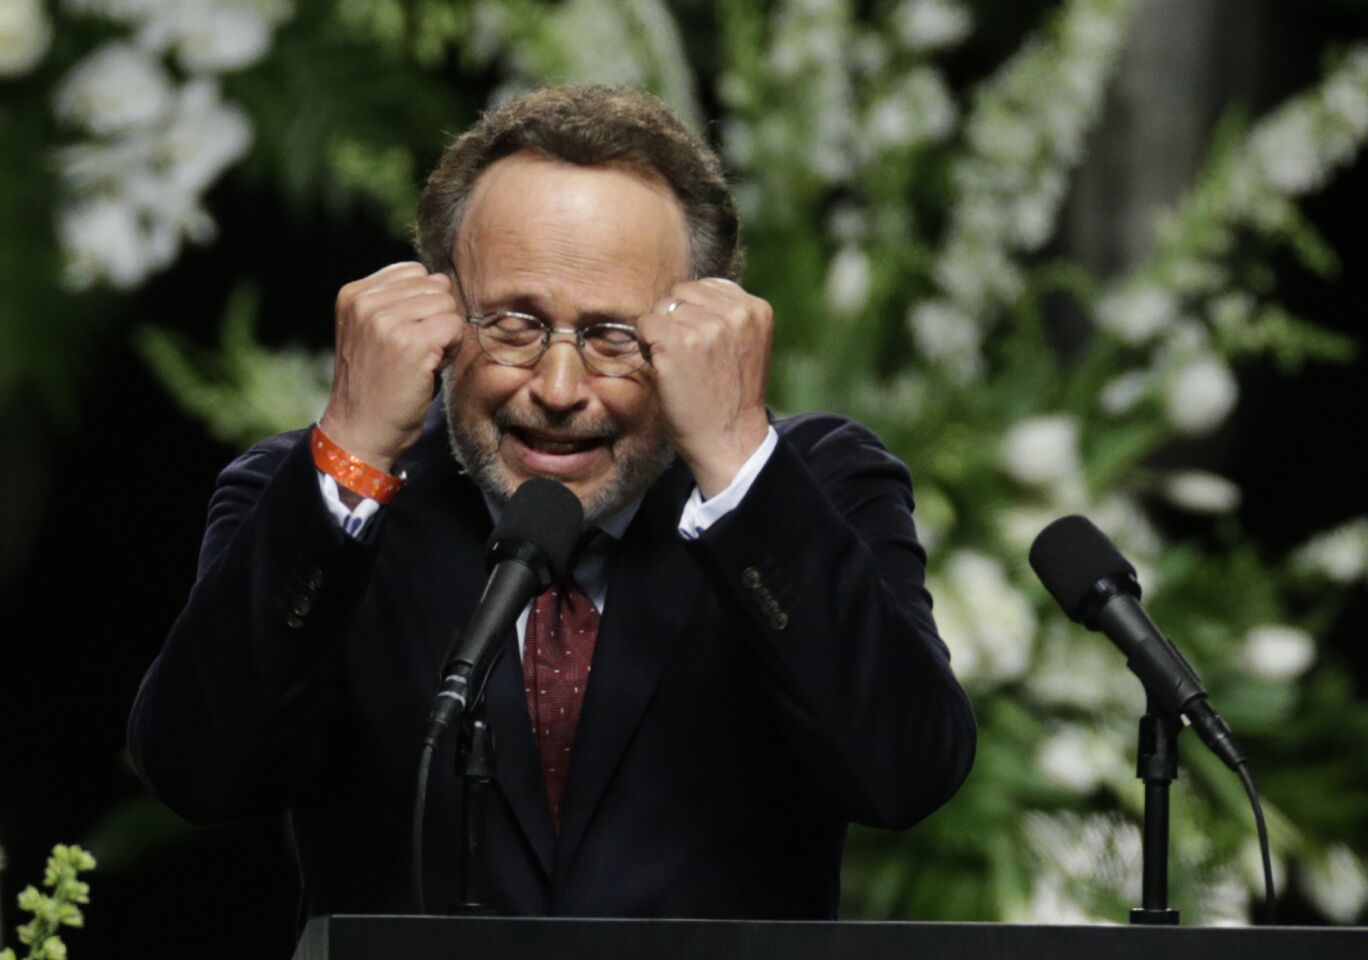 Comedian Billy Crystal imitates Muhammad Ali during the memorial service.